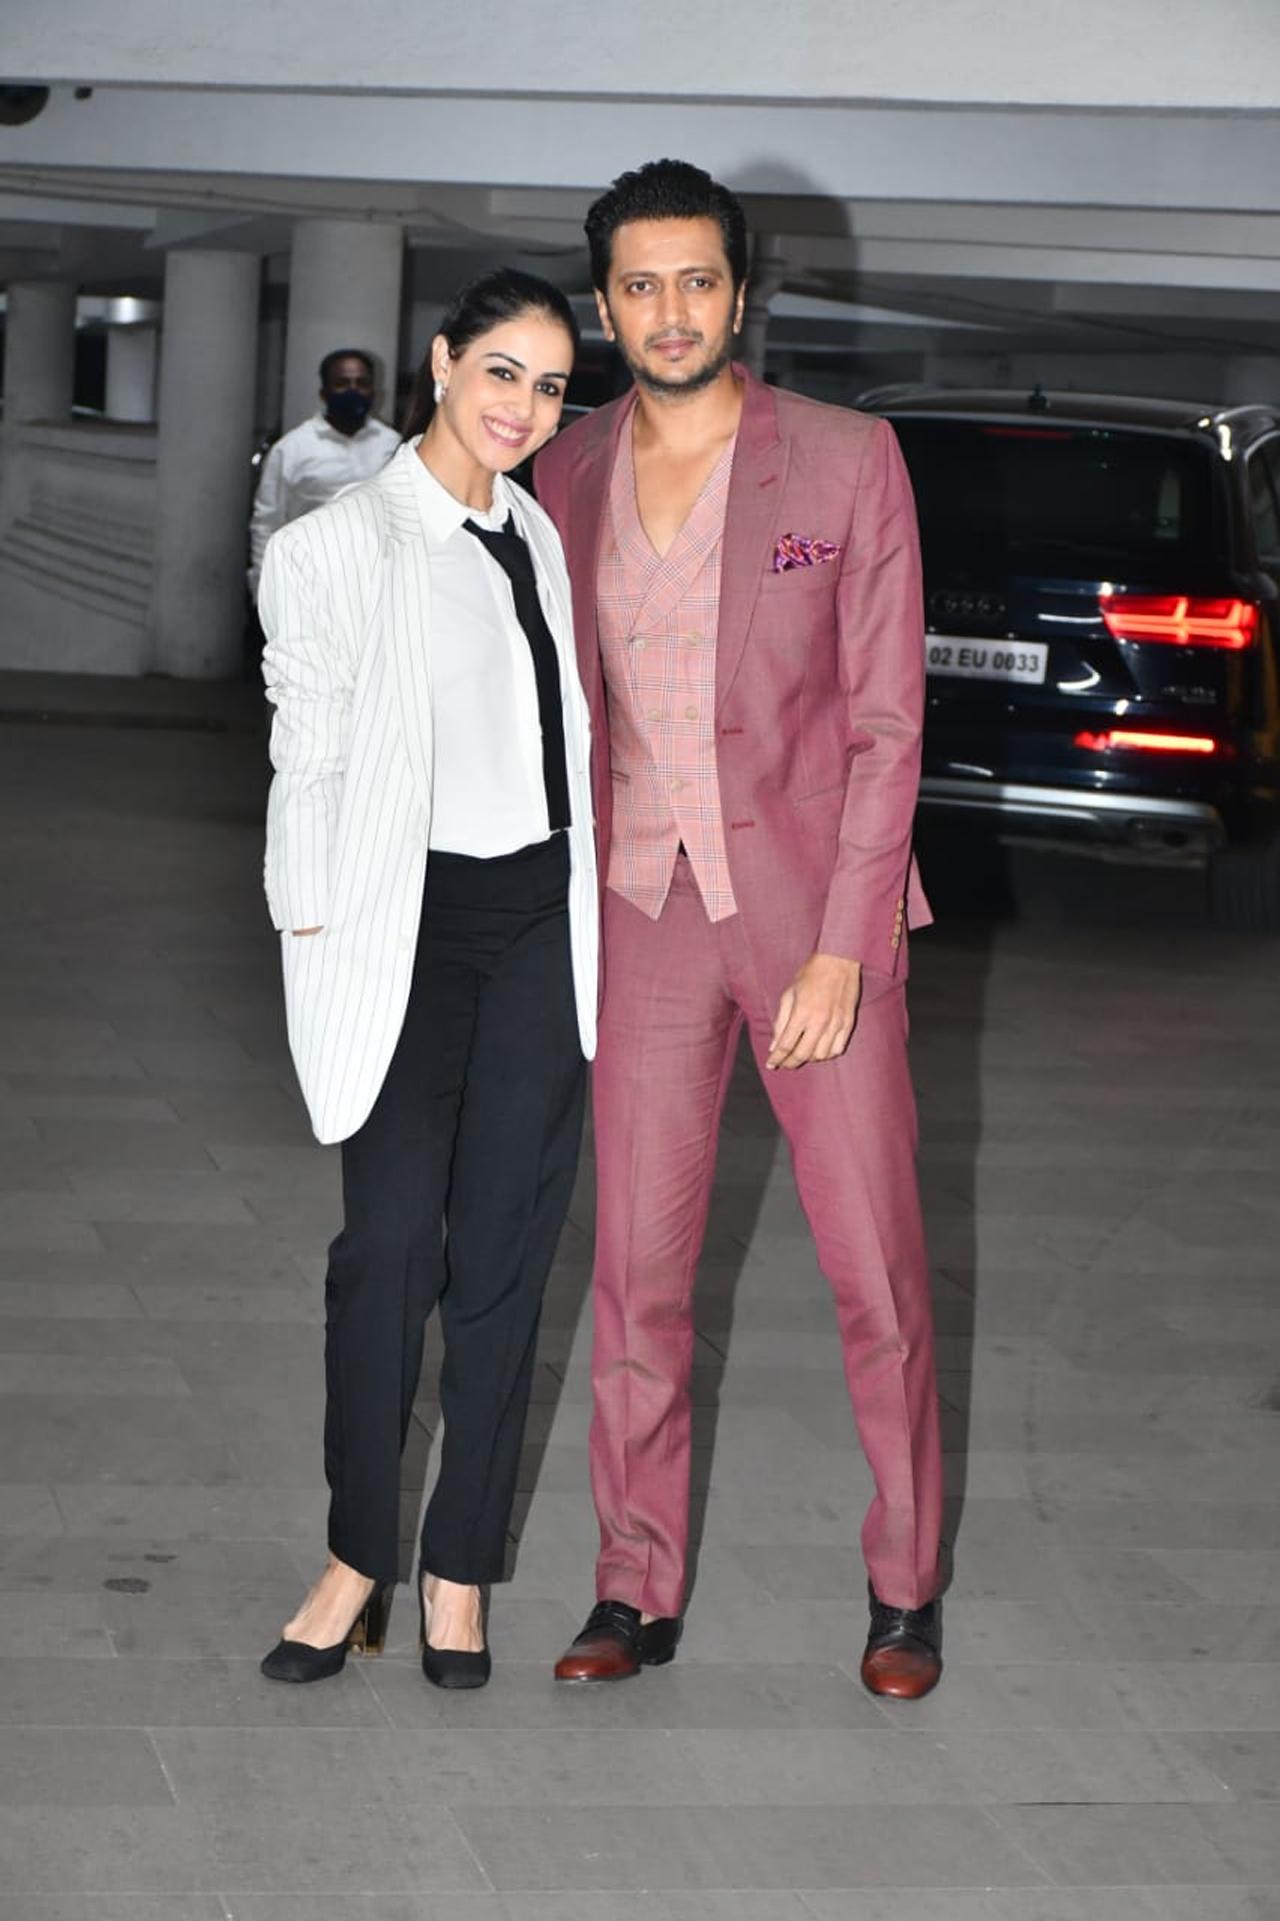 Genelia and Riteish Deshmukh suited up for the occasion, and we are truly loving the bossy vibes by the Bollywood actress.